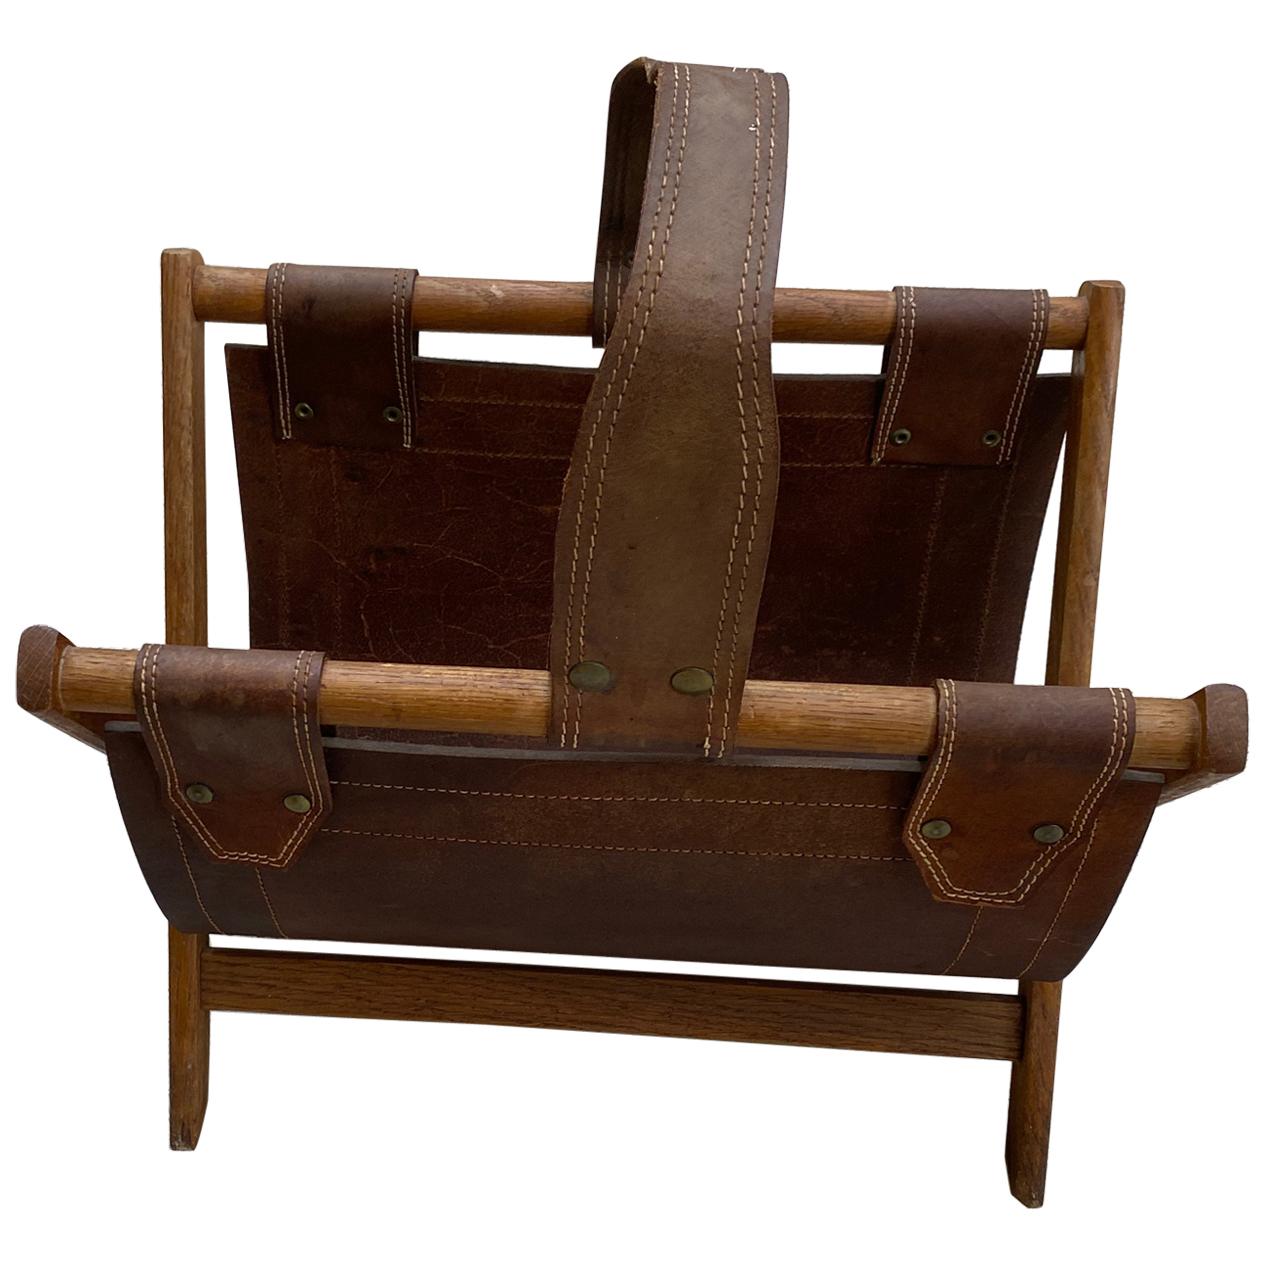 Magazine Rack in Oak and Leather, circa 1950-1960 For Sale